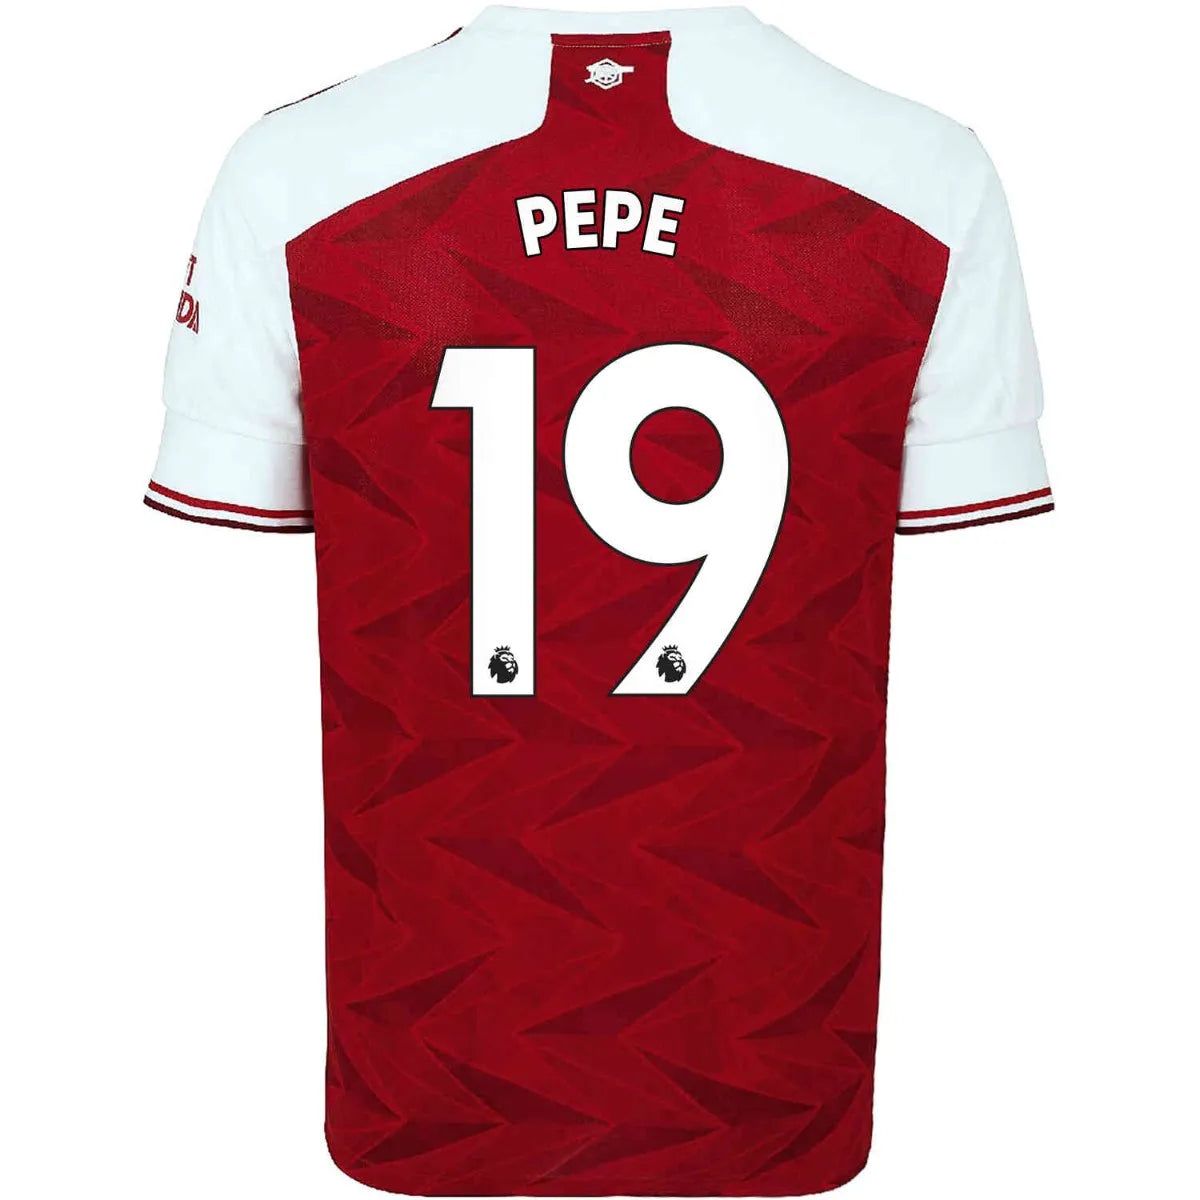 Adidas 2020-21 Arsenal Home Jersey - Red-White